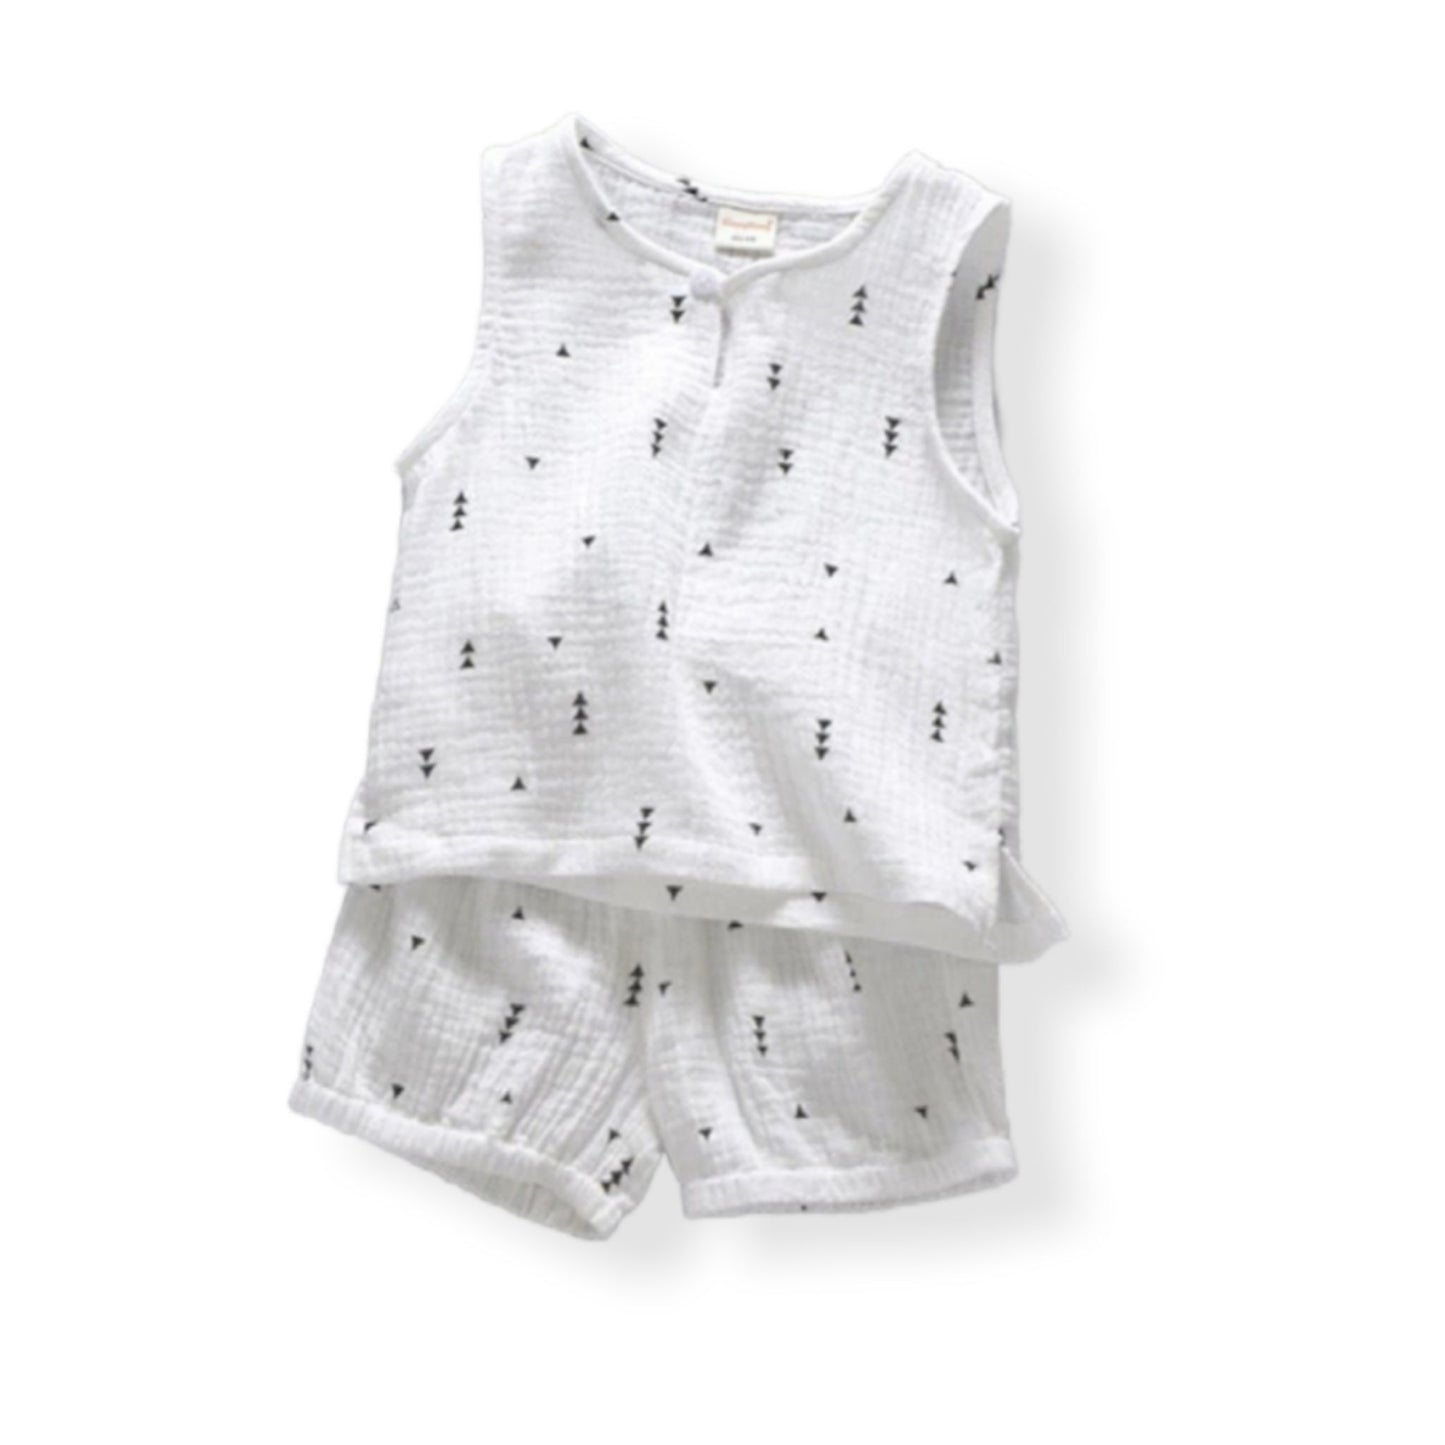 white unisex summer set for babies and kids | cute and comfortable shirt and shorts for babies